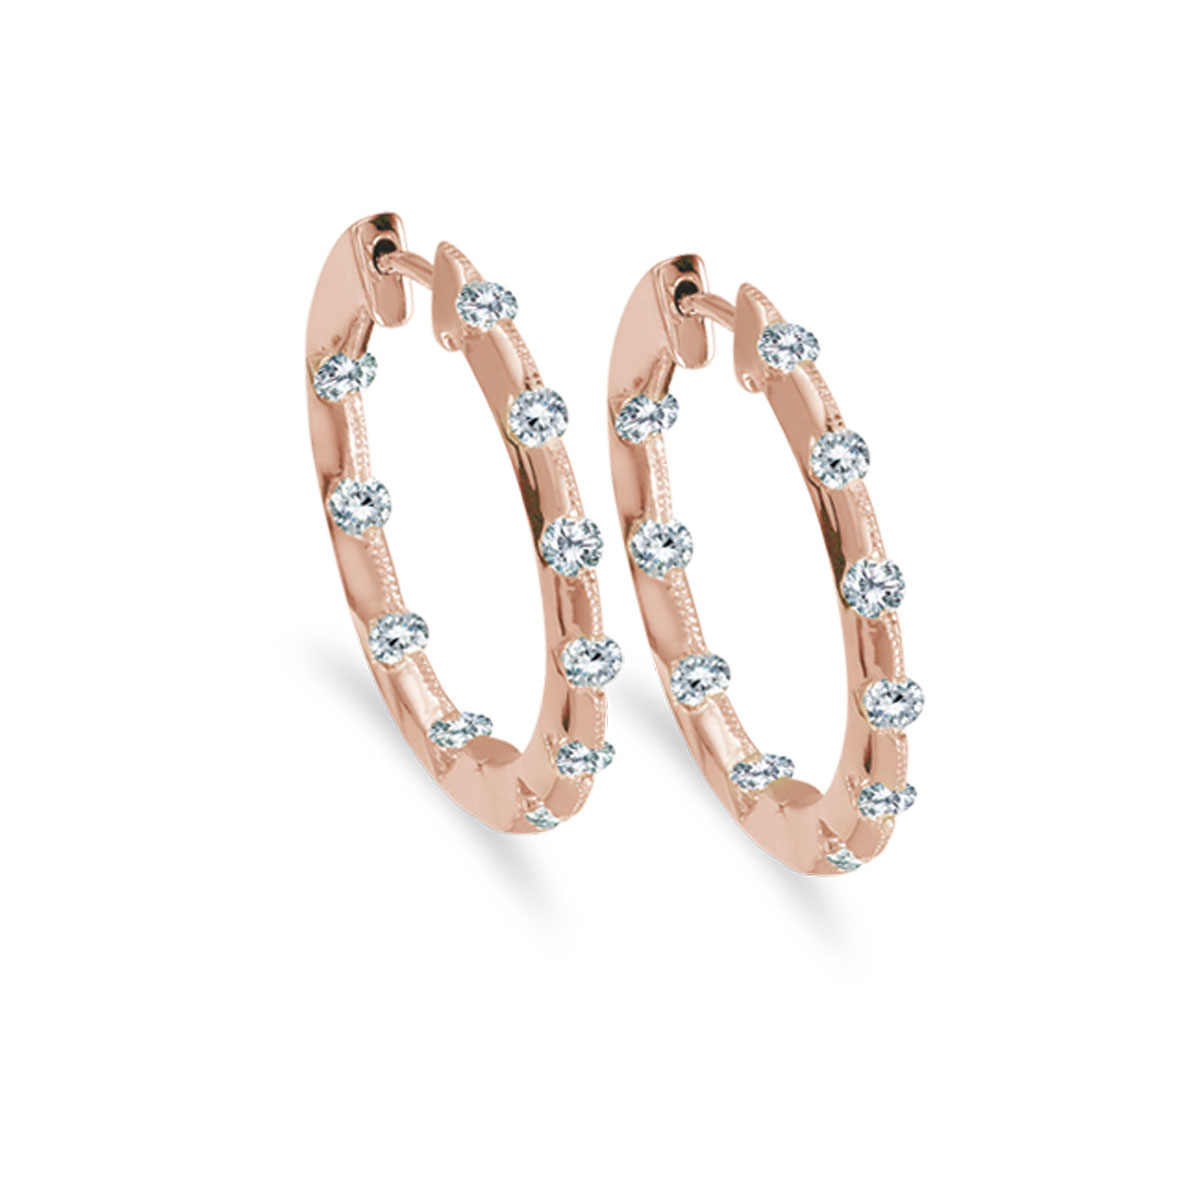 19 mm diamond inside/outside hoop earrings in beautiful 14k rose gold. The perfect look for day o...